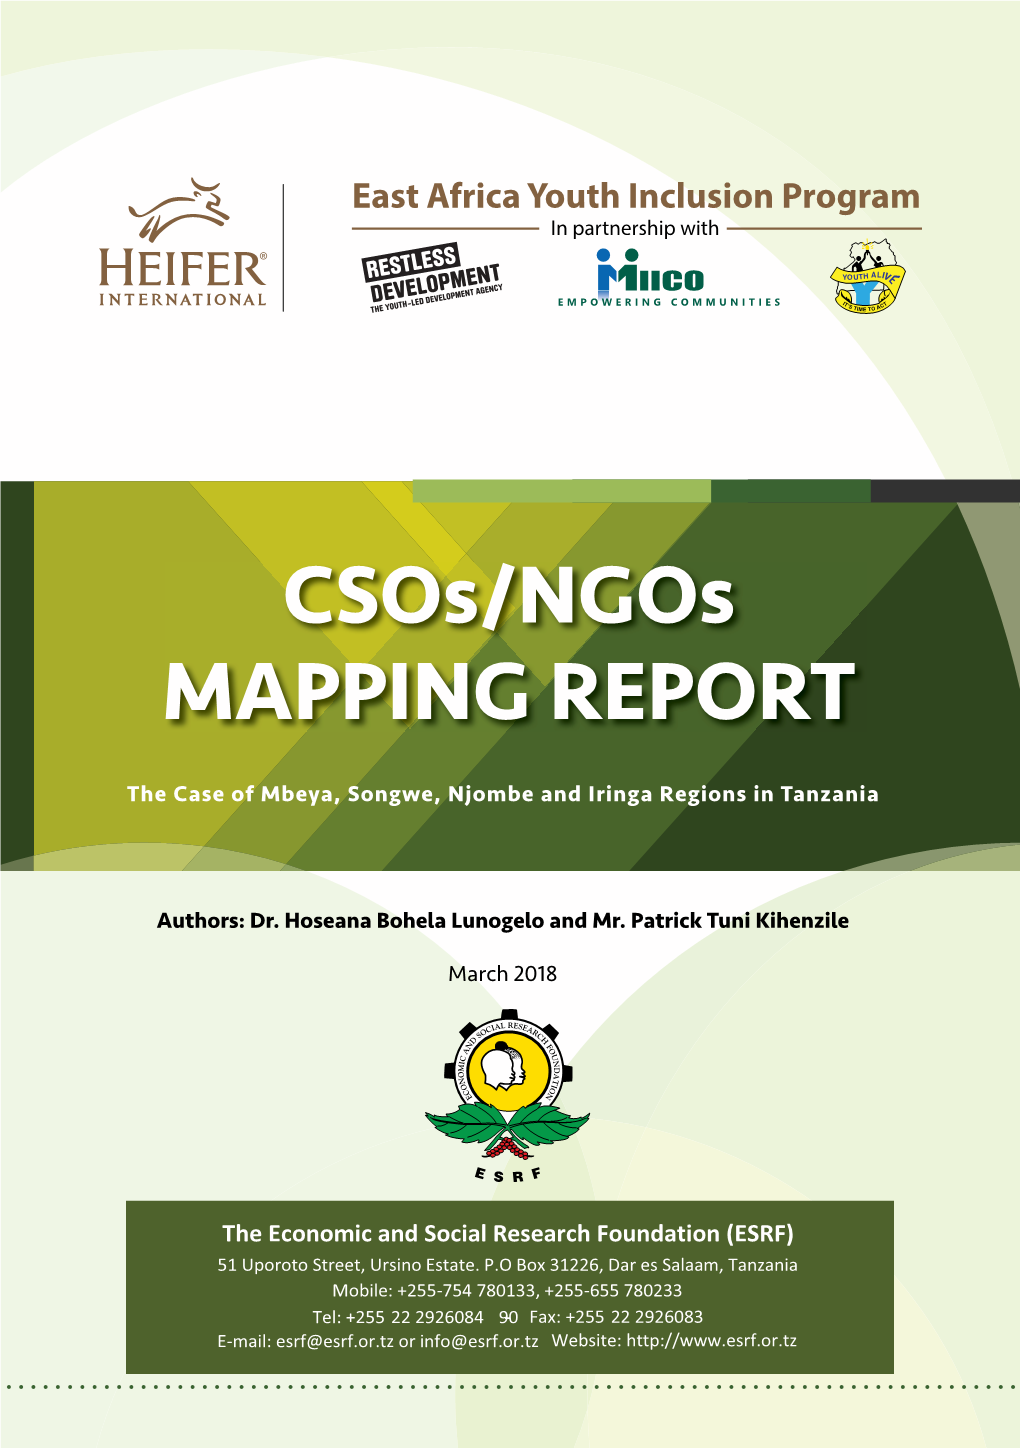 Csos/Ngos MAPPING REPORT | the Case of Mbeya, Songwe, Njombe and Iringa Regions in Tanzania